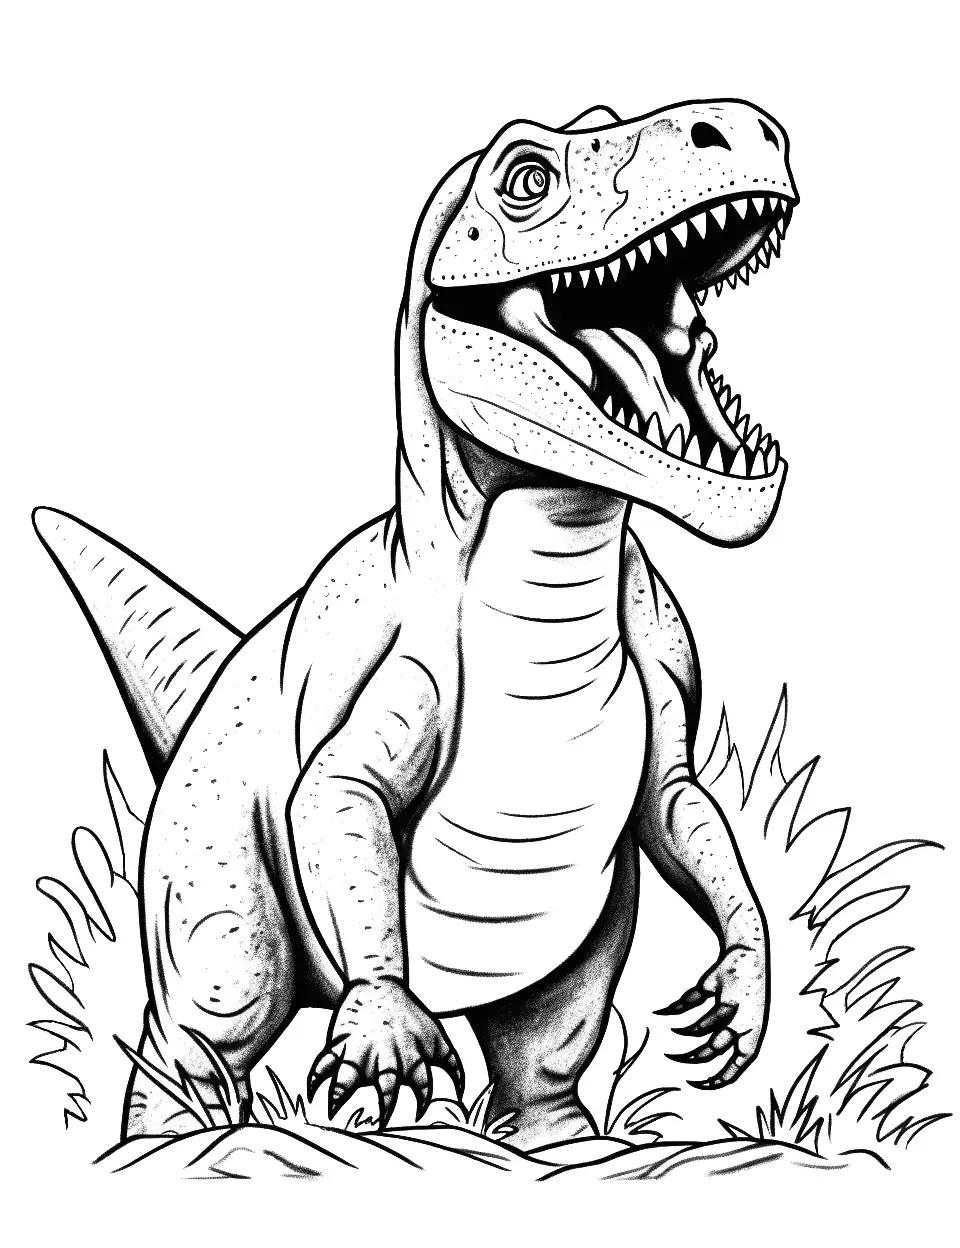 Tyrannosaurus Roar Coloring Page - A fearsome Tyrannosaurus letting out a mighty roar.